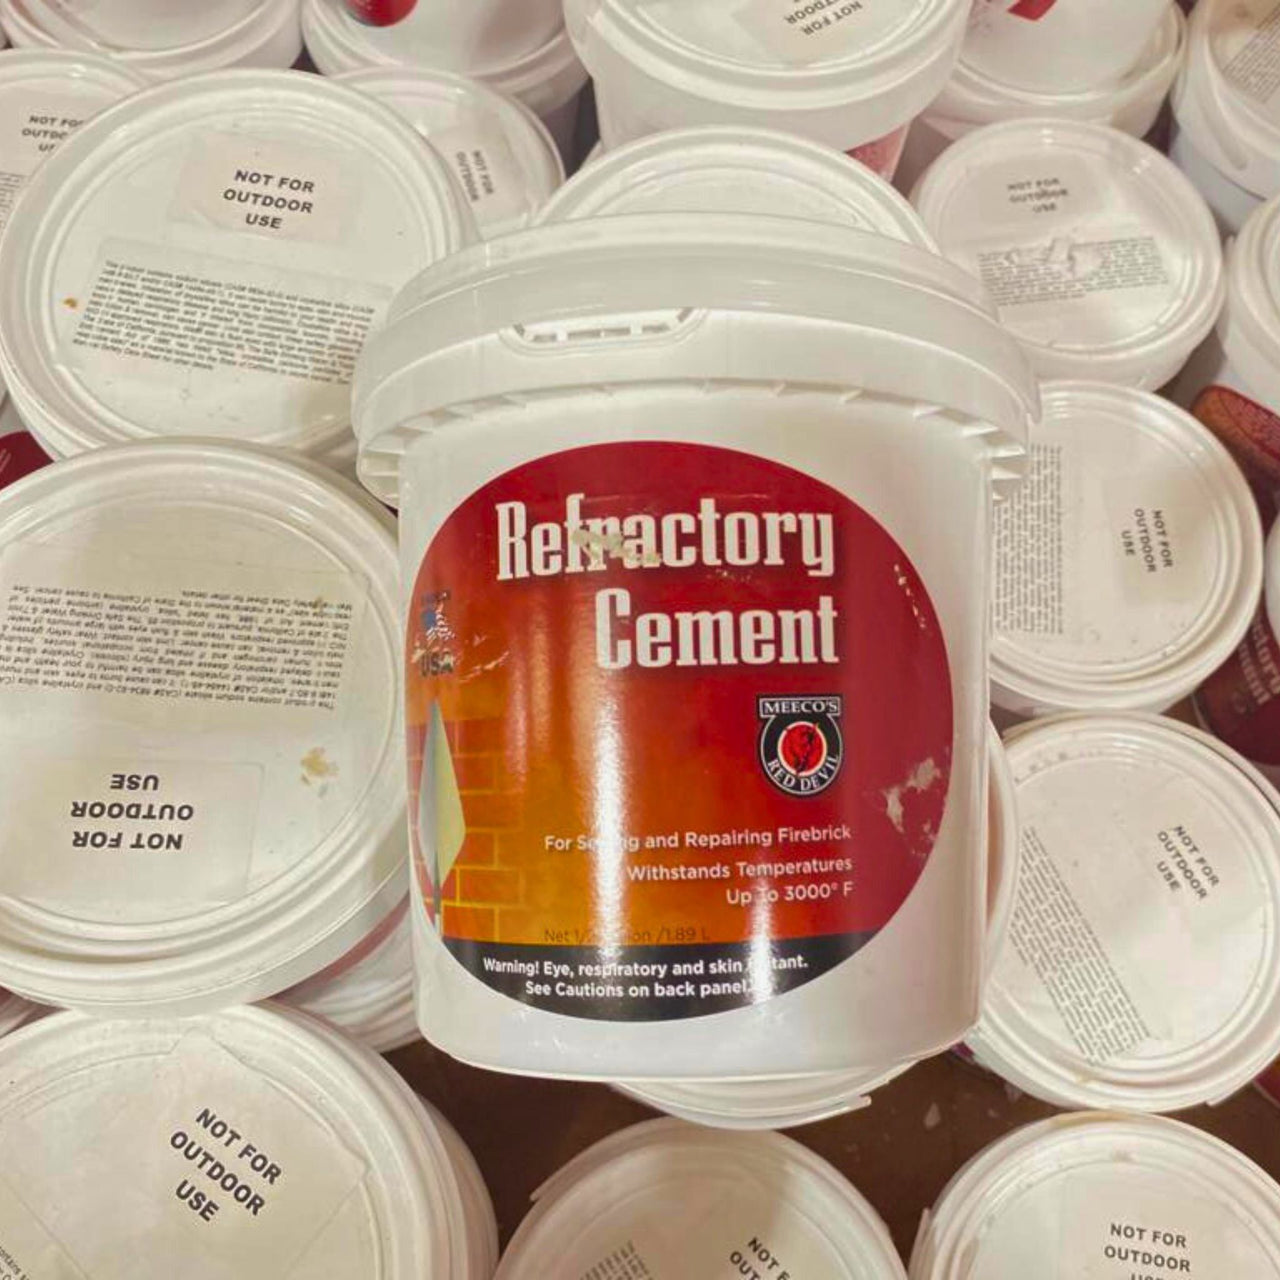 Refractory Cement for Sealing and Repairing Firebrick